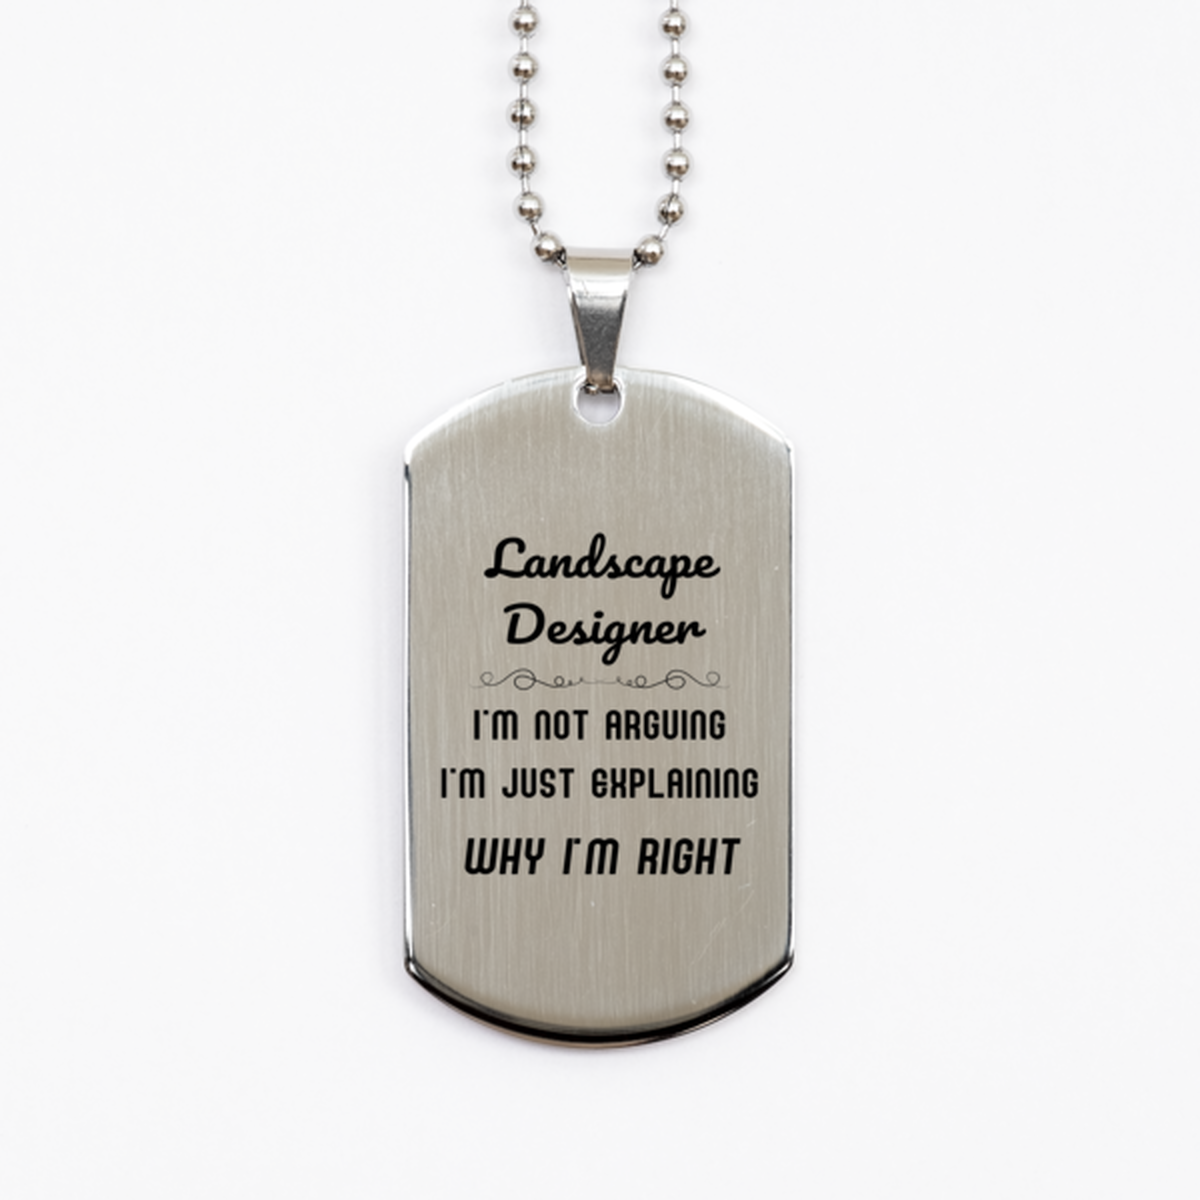 Landscape Designer I'm not Arguing. I'm Just Explaining Why I'm RIGHT Silver Dog Tag, Funny Saying Quote Landscape Designer Gifts For Landscape Designer Graduation Birthday Christmas Gifts for Men Women Coworker